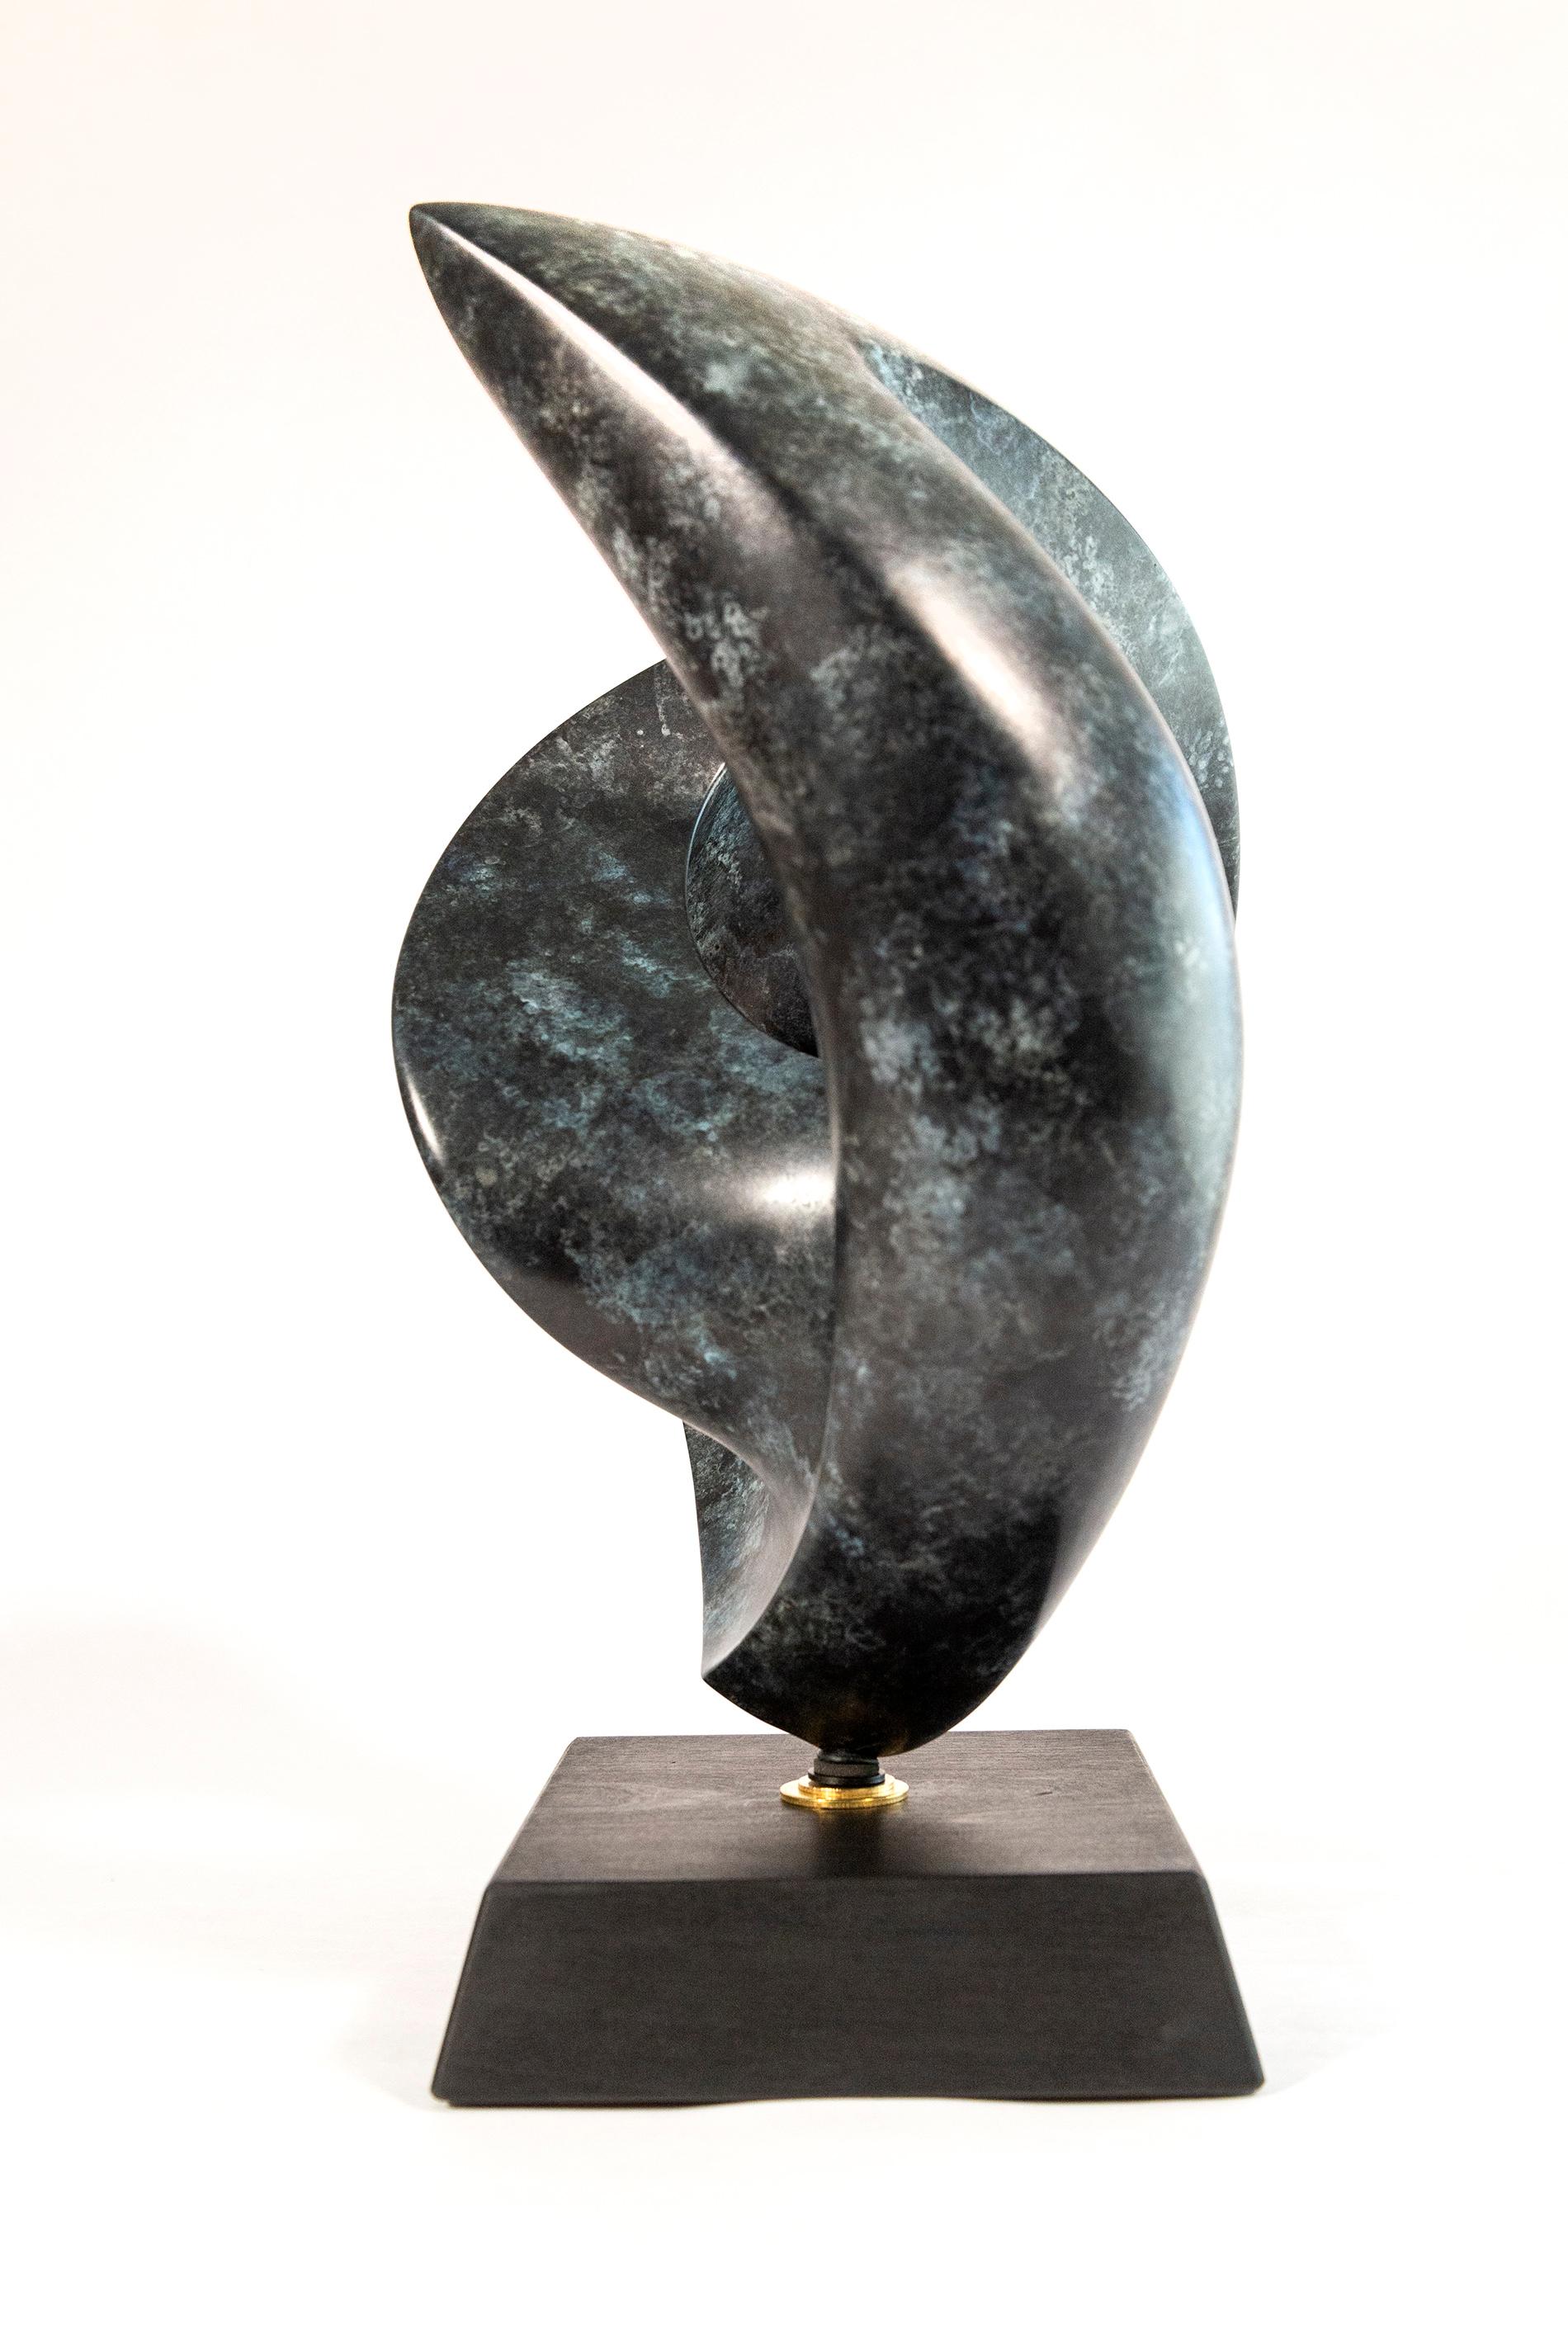 Rhapsody Ed. 1/15 - smooth, polished, abstract, bronze and mahogany sculpture - Abstract Sculpture by David Chamberlain